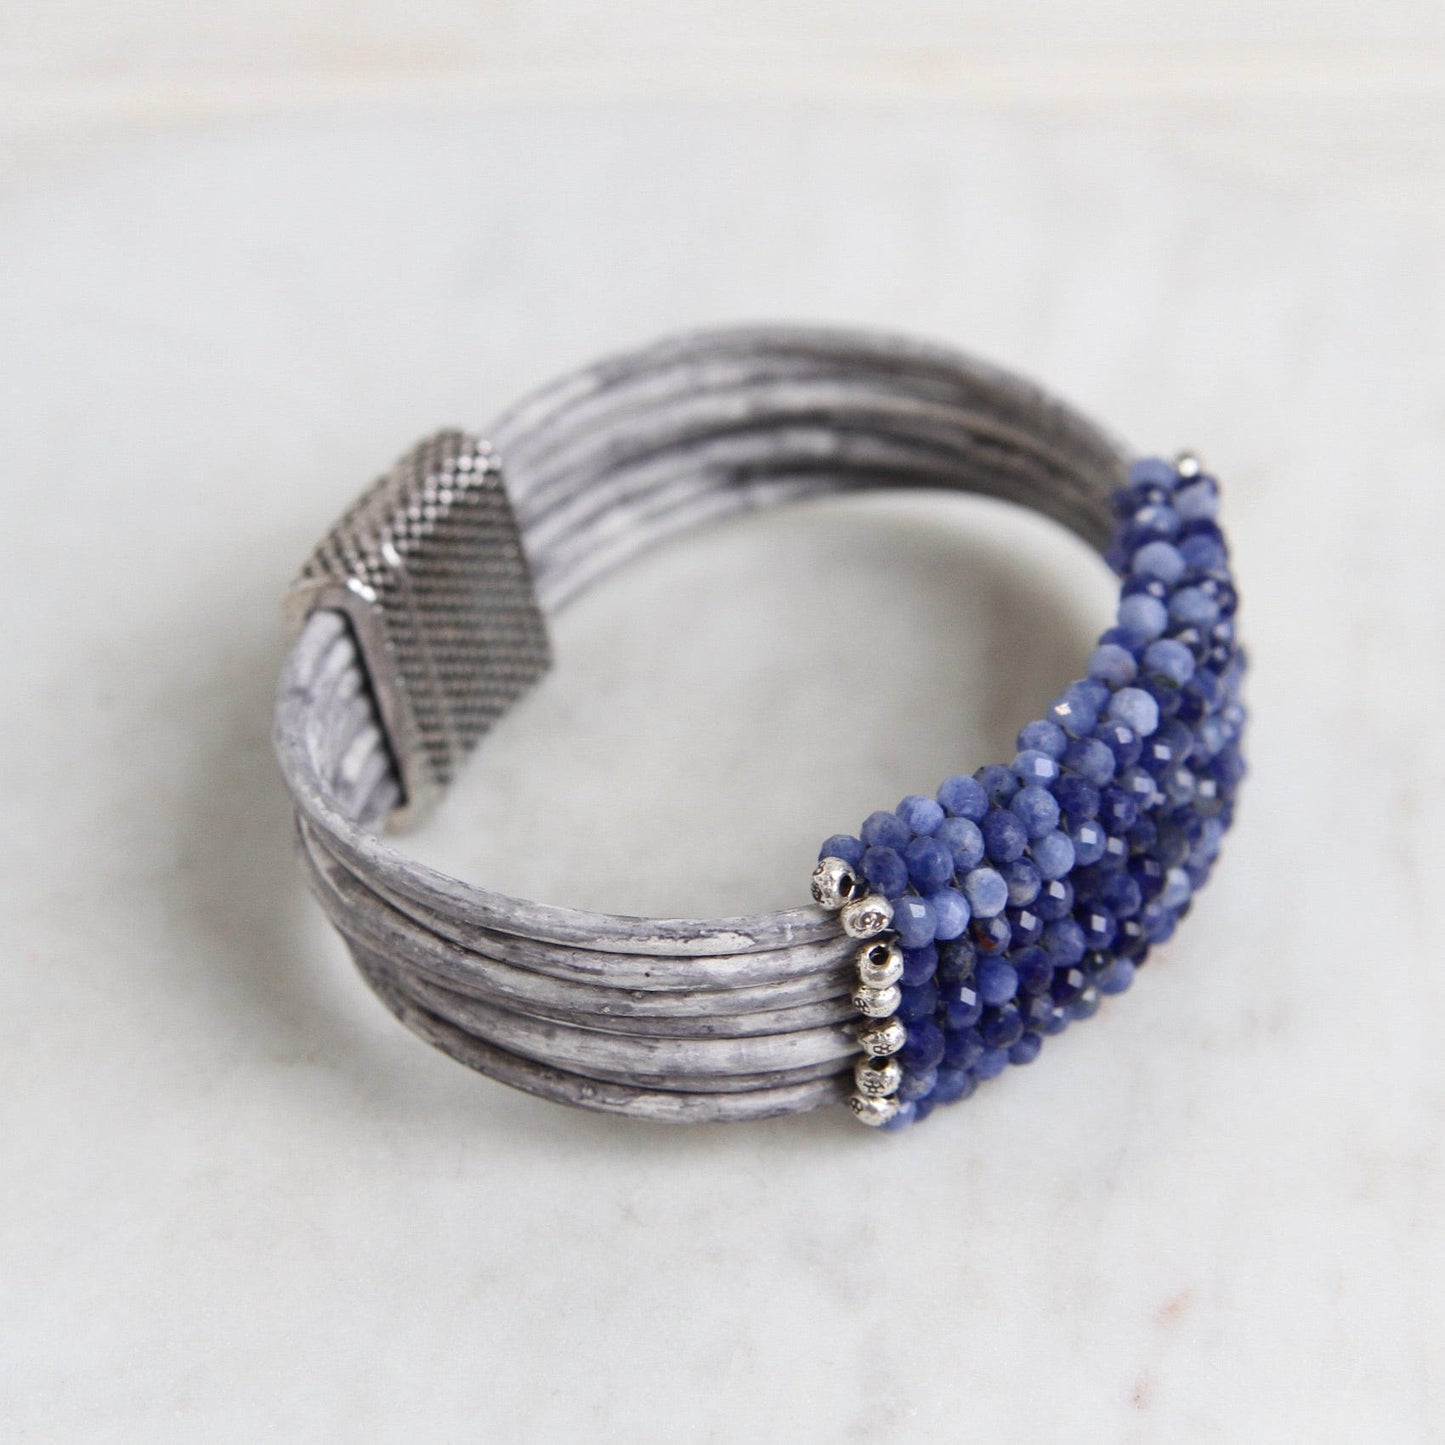 BRC-JM Hand Stitched Shaded Sodalite with Hill Tribe Stamped Fine Silver Bead Trim Bracelet